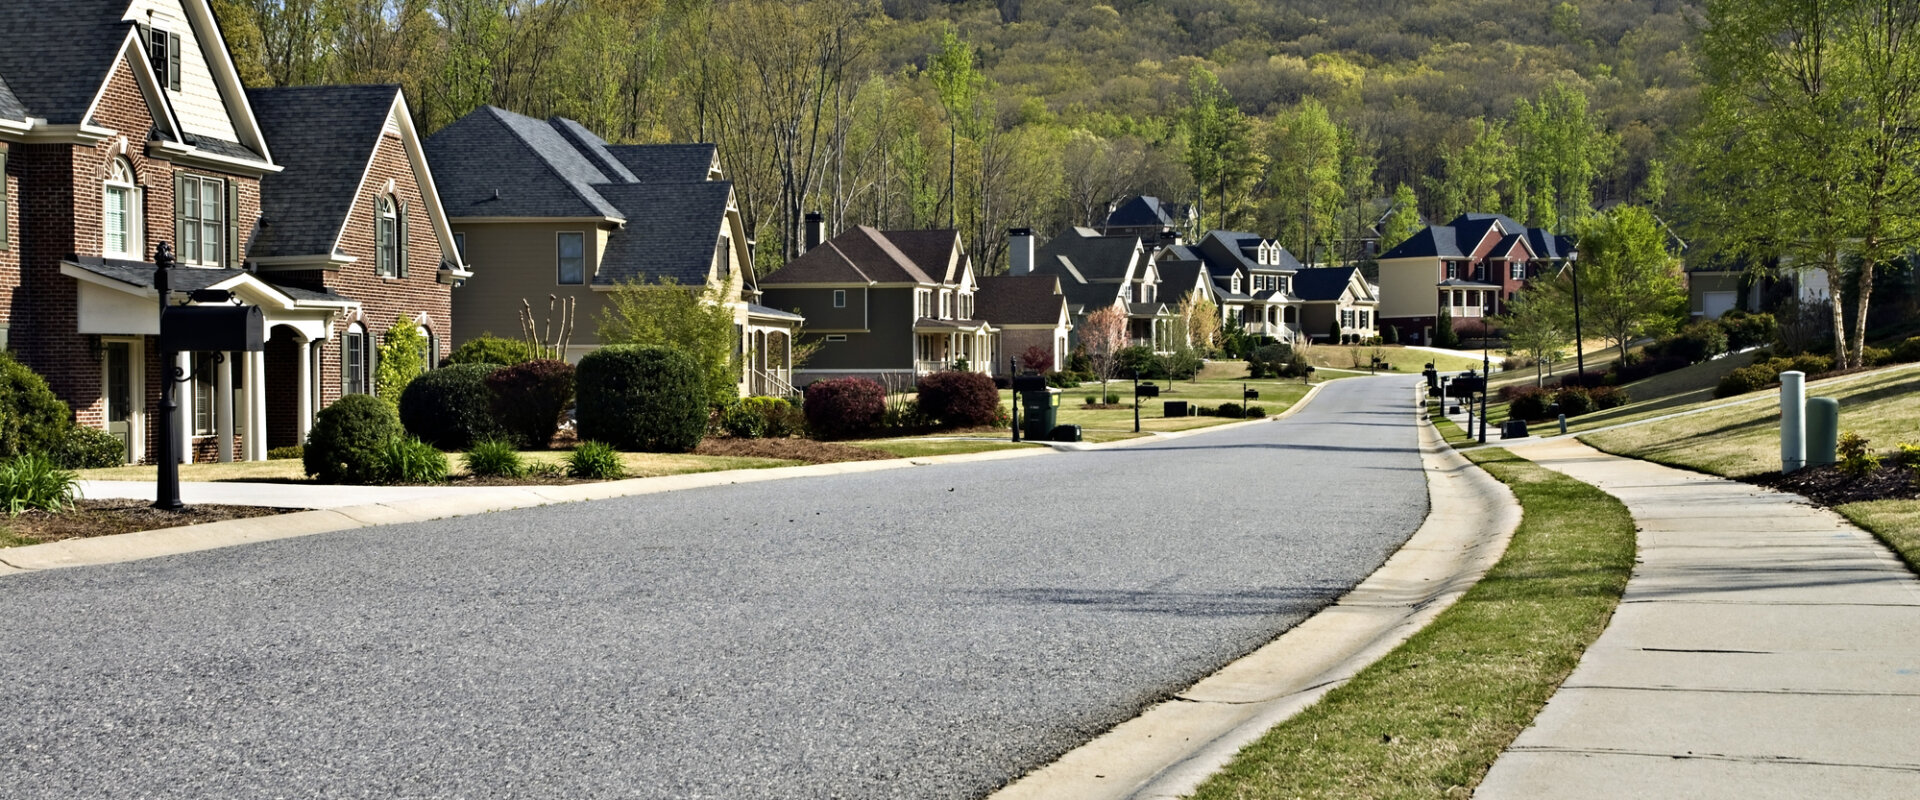 A paved road lined with quintessential Virginia homes, showcasing the vibrant Franklin community. Looking to sell your house fast Franklin VA homeowners? HR Property Doctor is here to help with cash home buying.